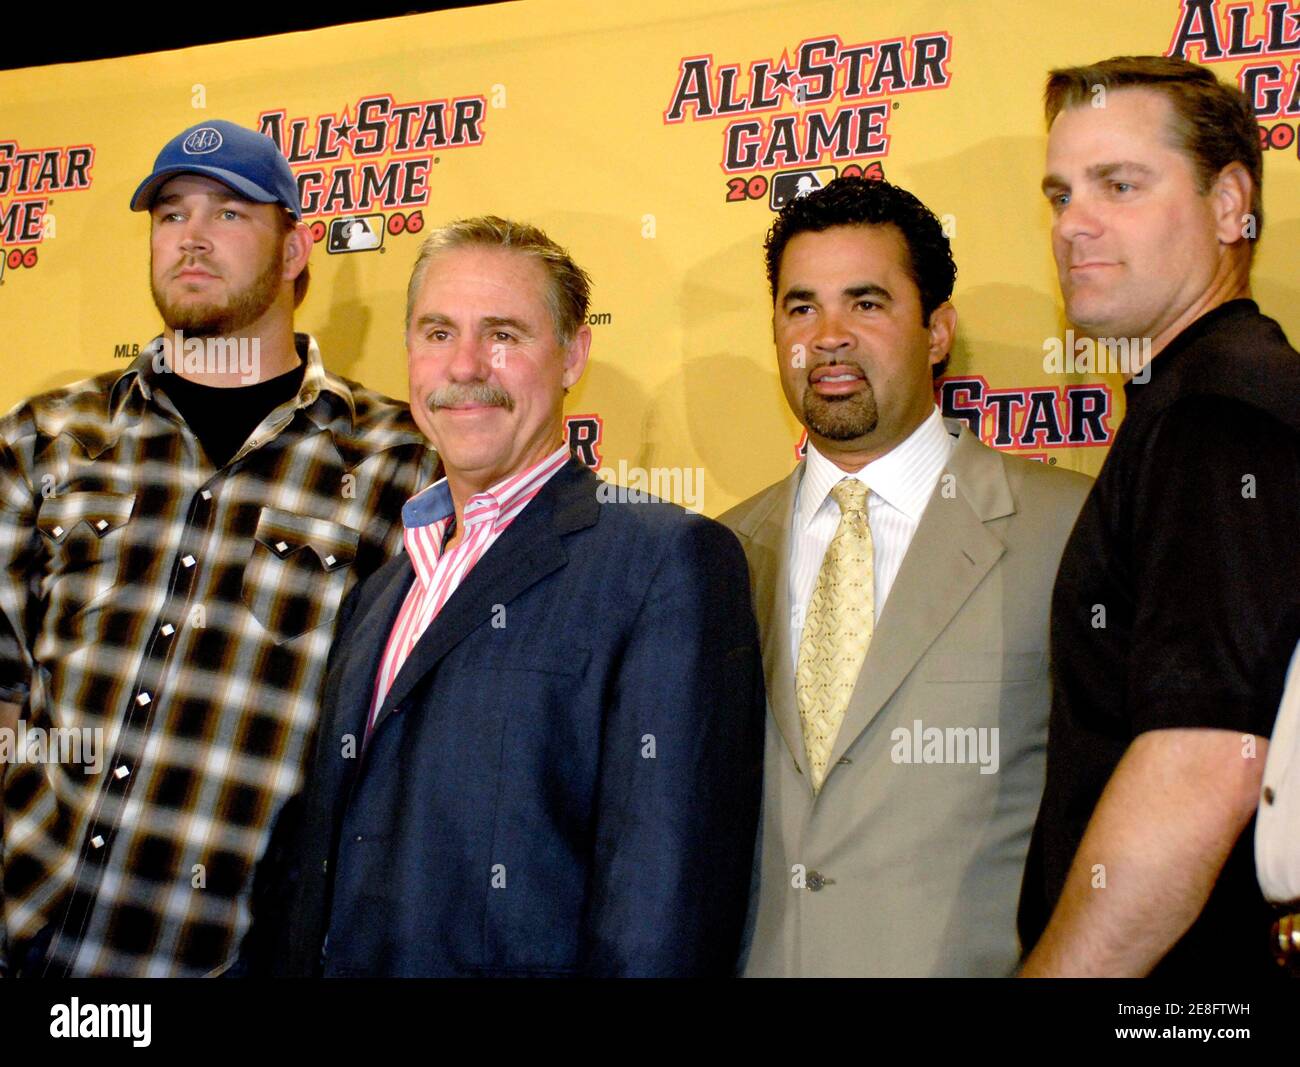 National League All Star starting pitcher Brad Penny (L) of the Los Angeles  Dodgers, National League manager Phil Garner (2nd L) of the Houston Astros,  American League manager Ozzie Guillen of the